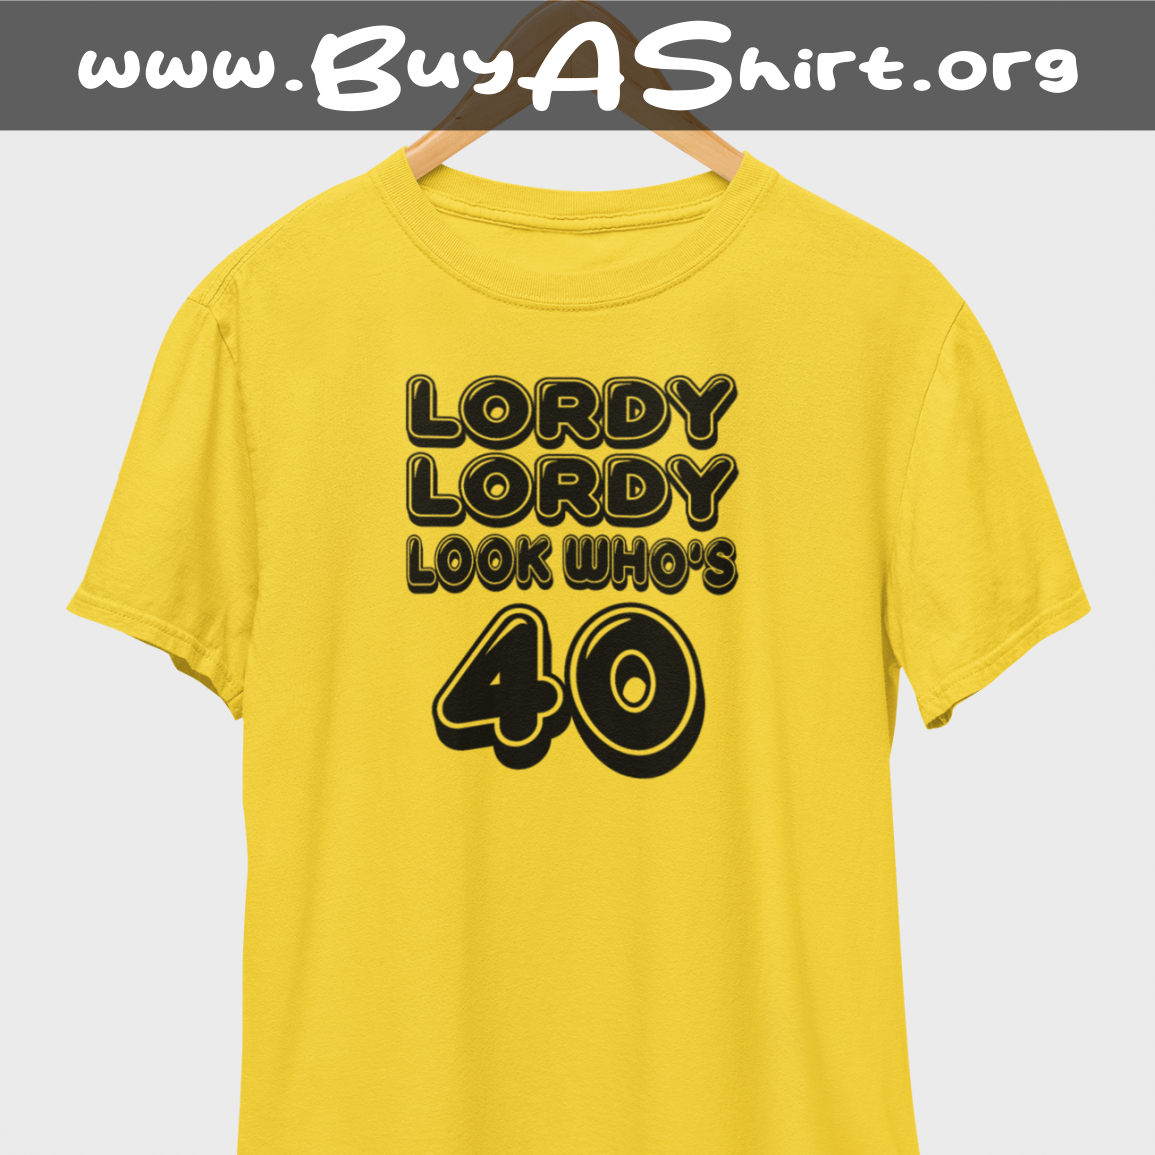 Lordy Lordy Look Who's 40 Black Print T-Shirt